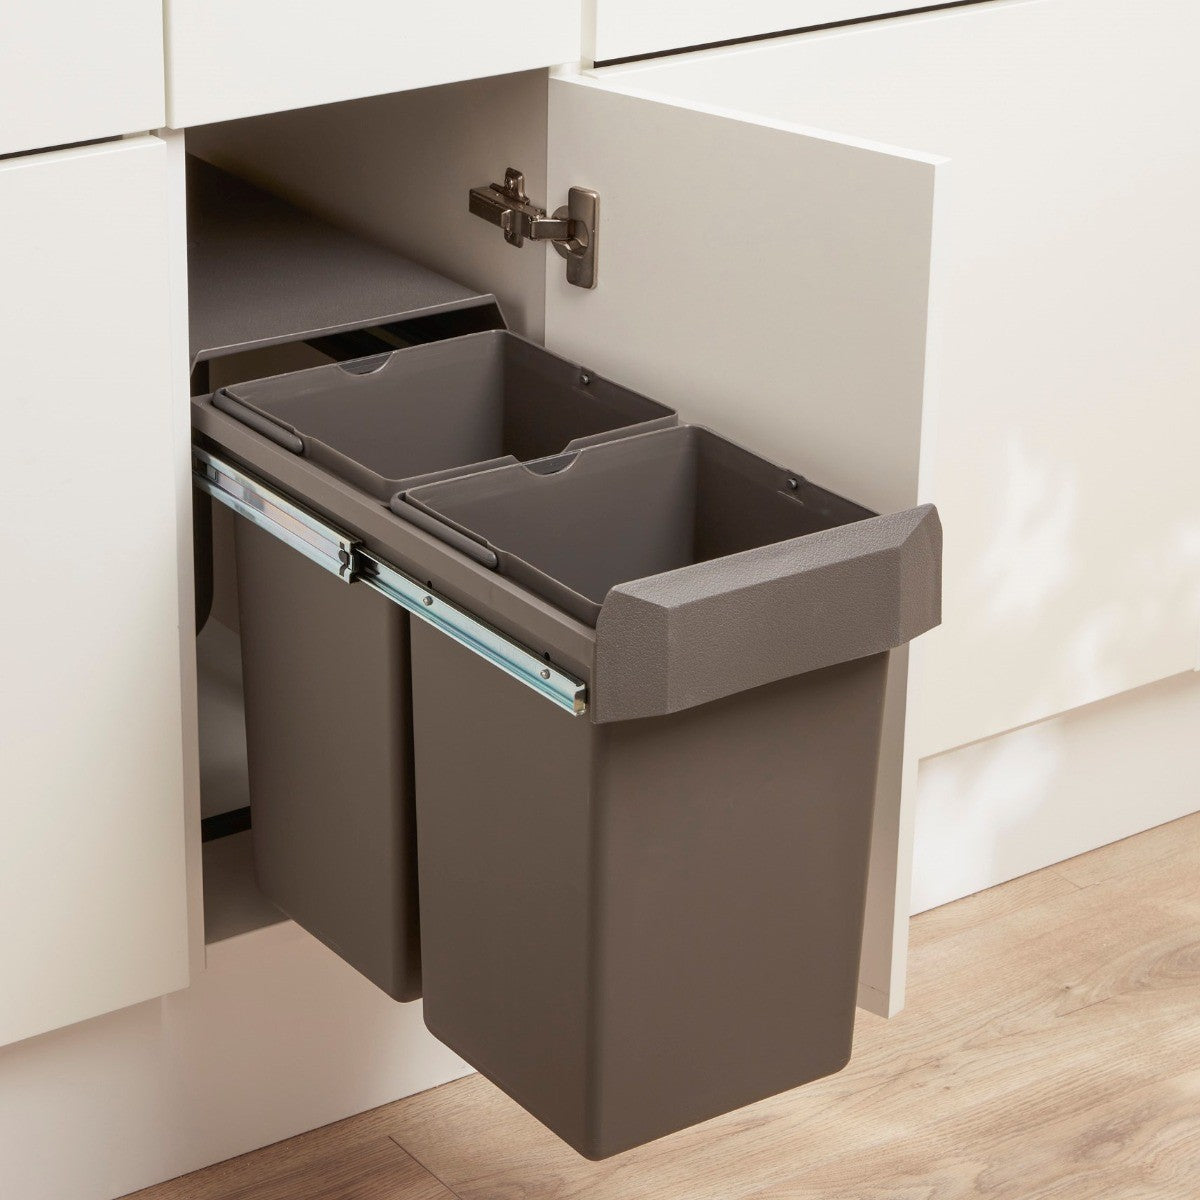 Wesco Double Boy Compact  2 Compartment 30 litre in-cupboard kitchen recycling bin in dark Orion Grey for 300mm wide hinged door cabinet 755WS601-72